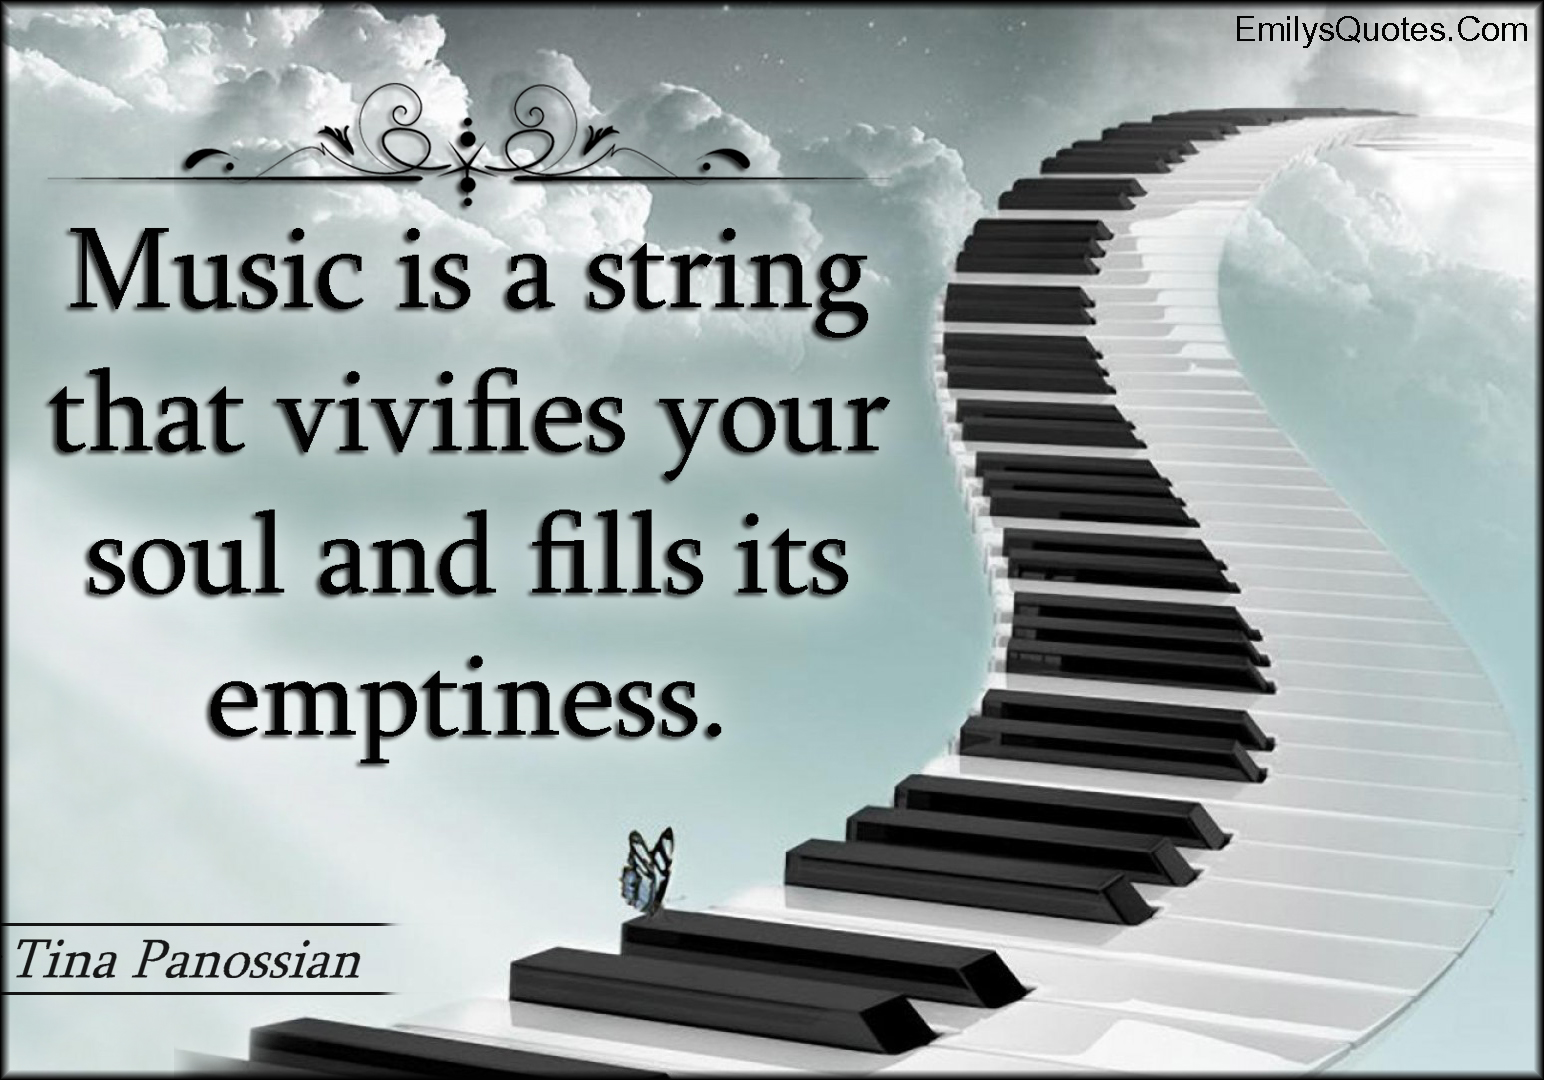 Music is a string that vivifies your soul and fills its emptiness